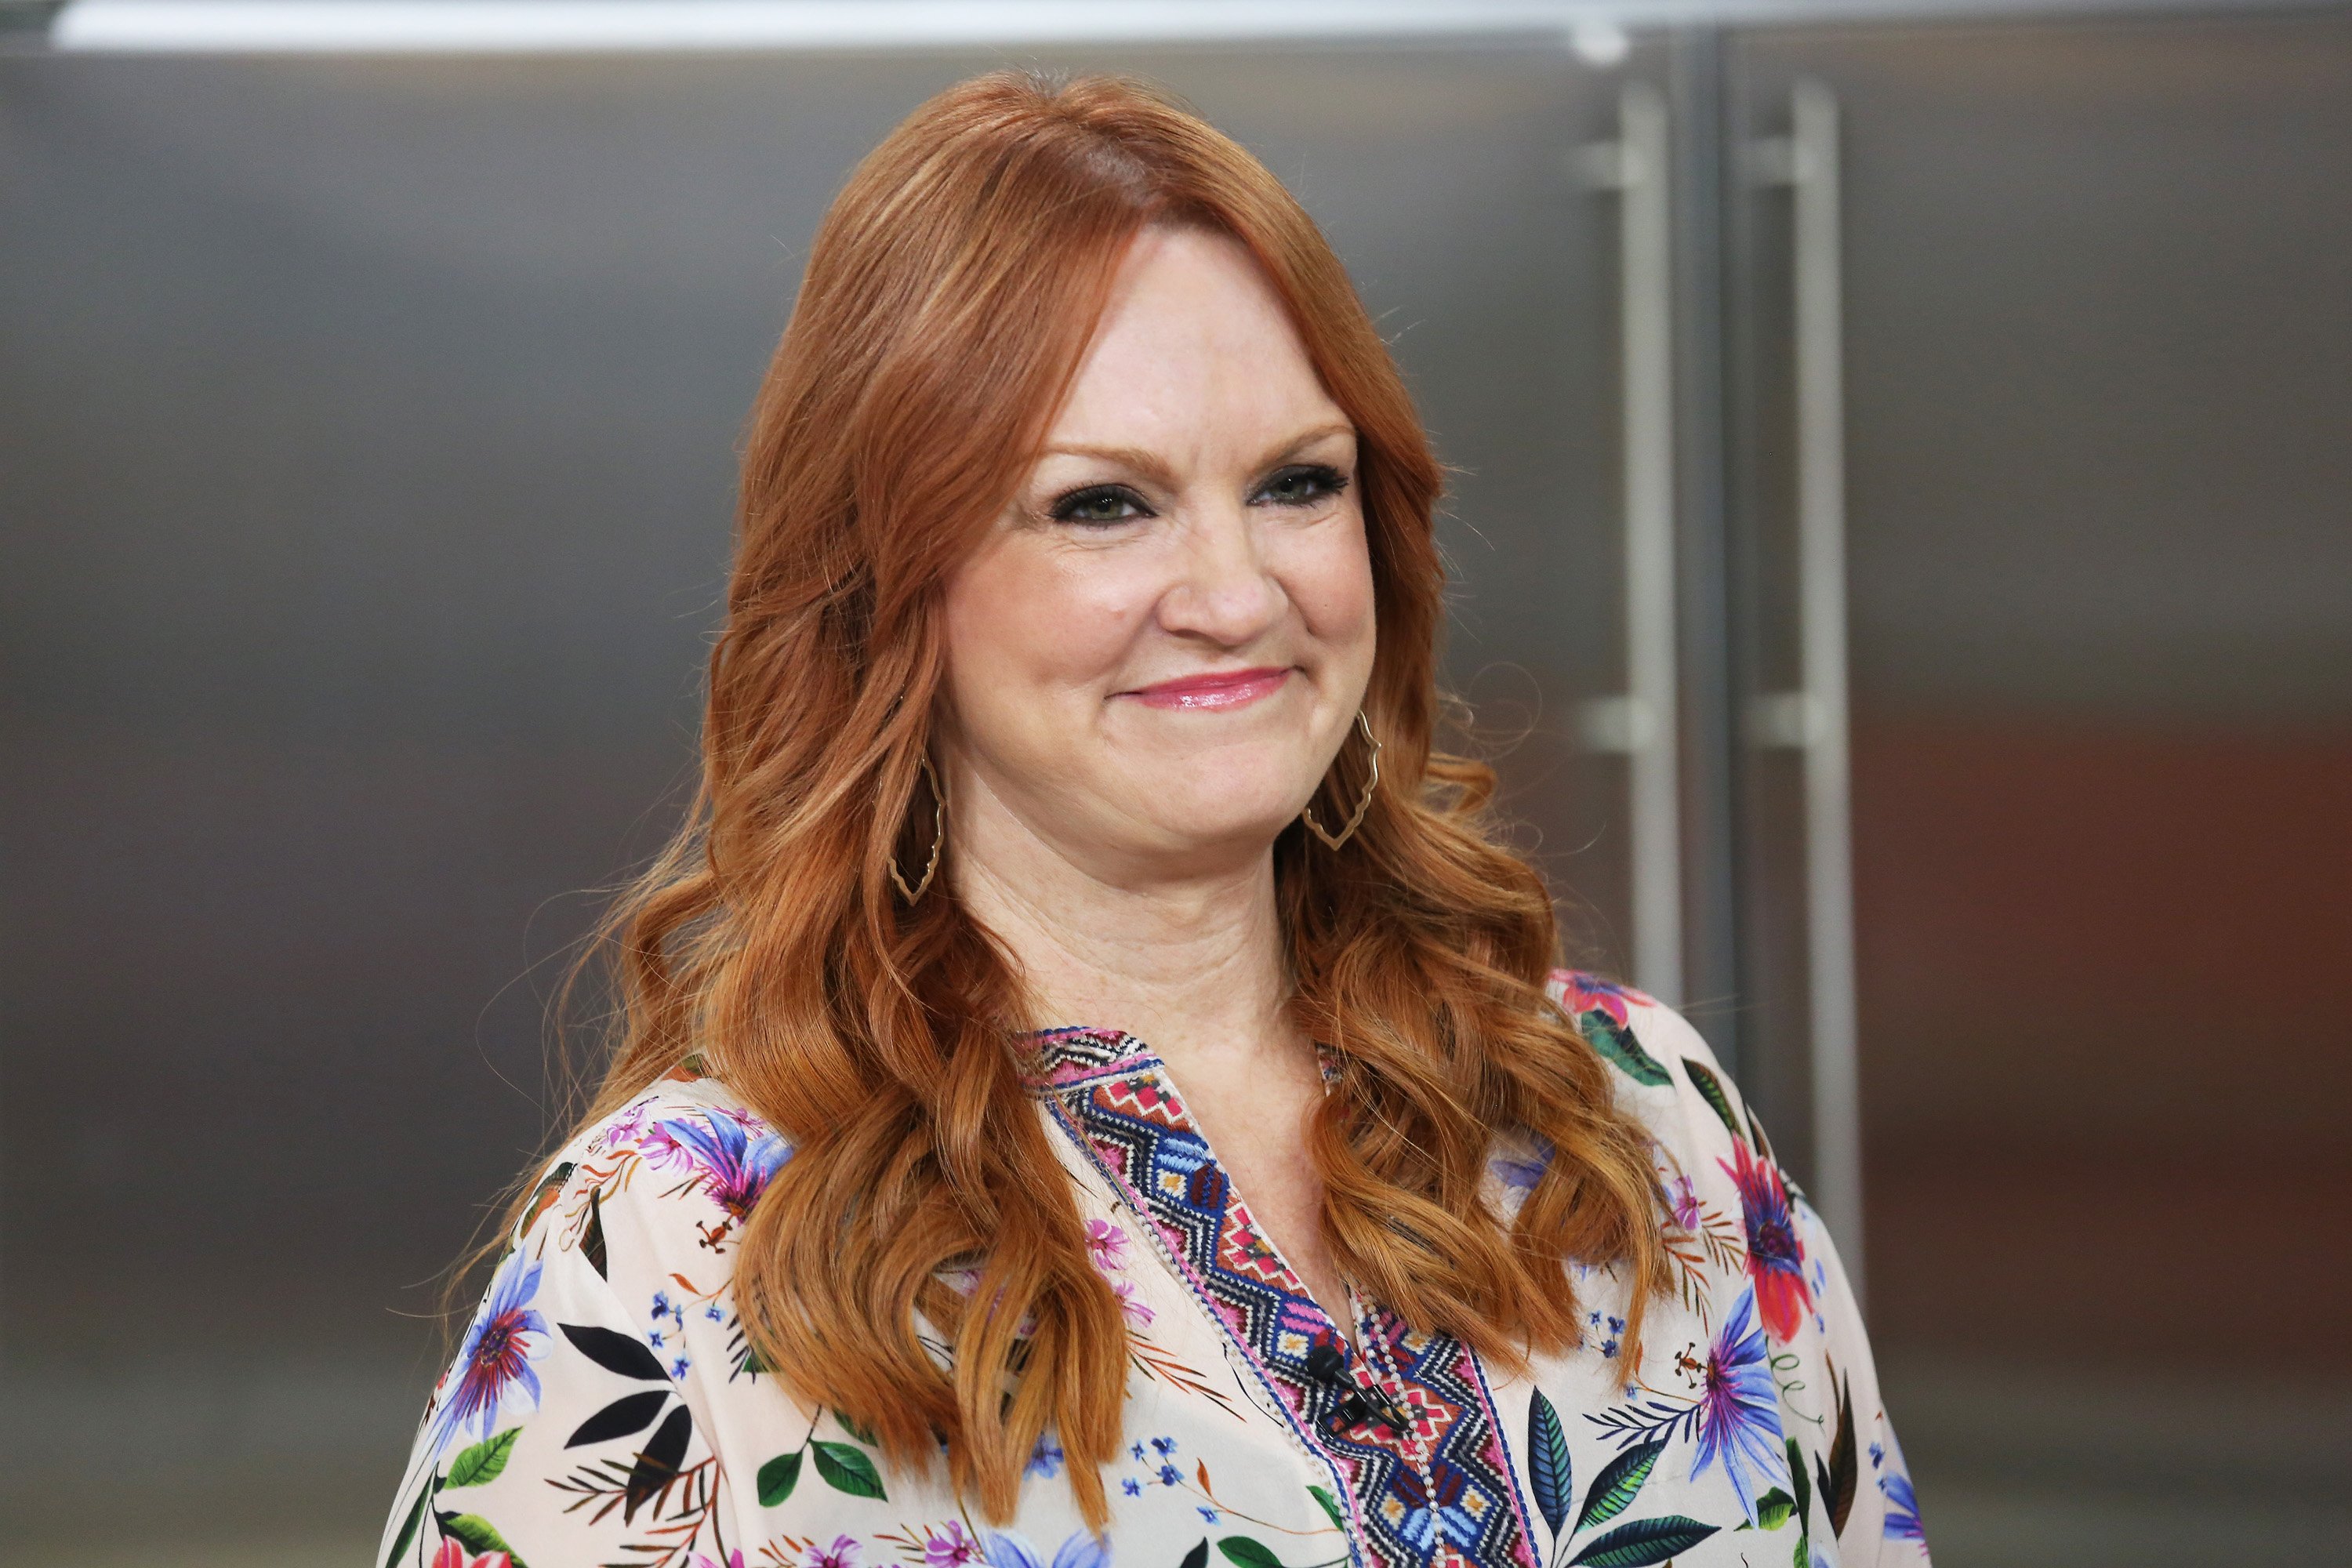 Celebrity chef Ree Drummond wears a multi-print blouse in this photograph.